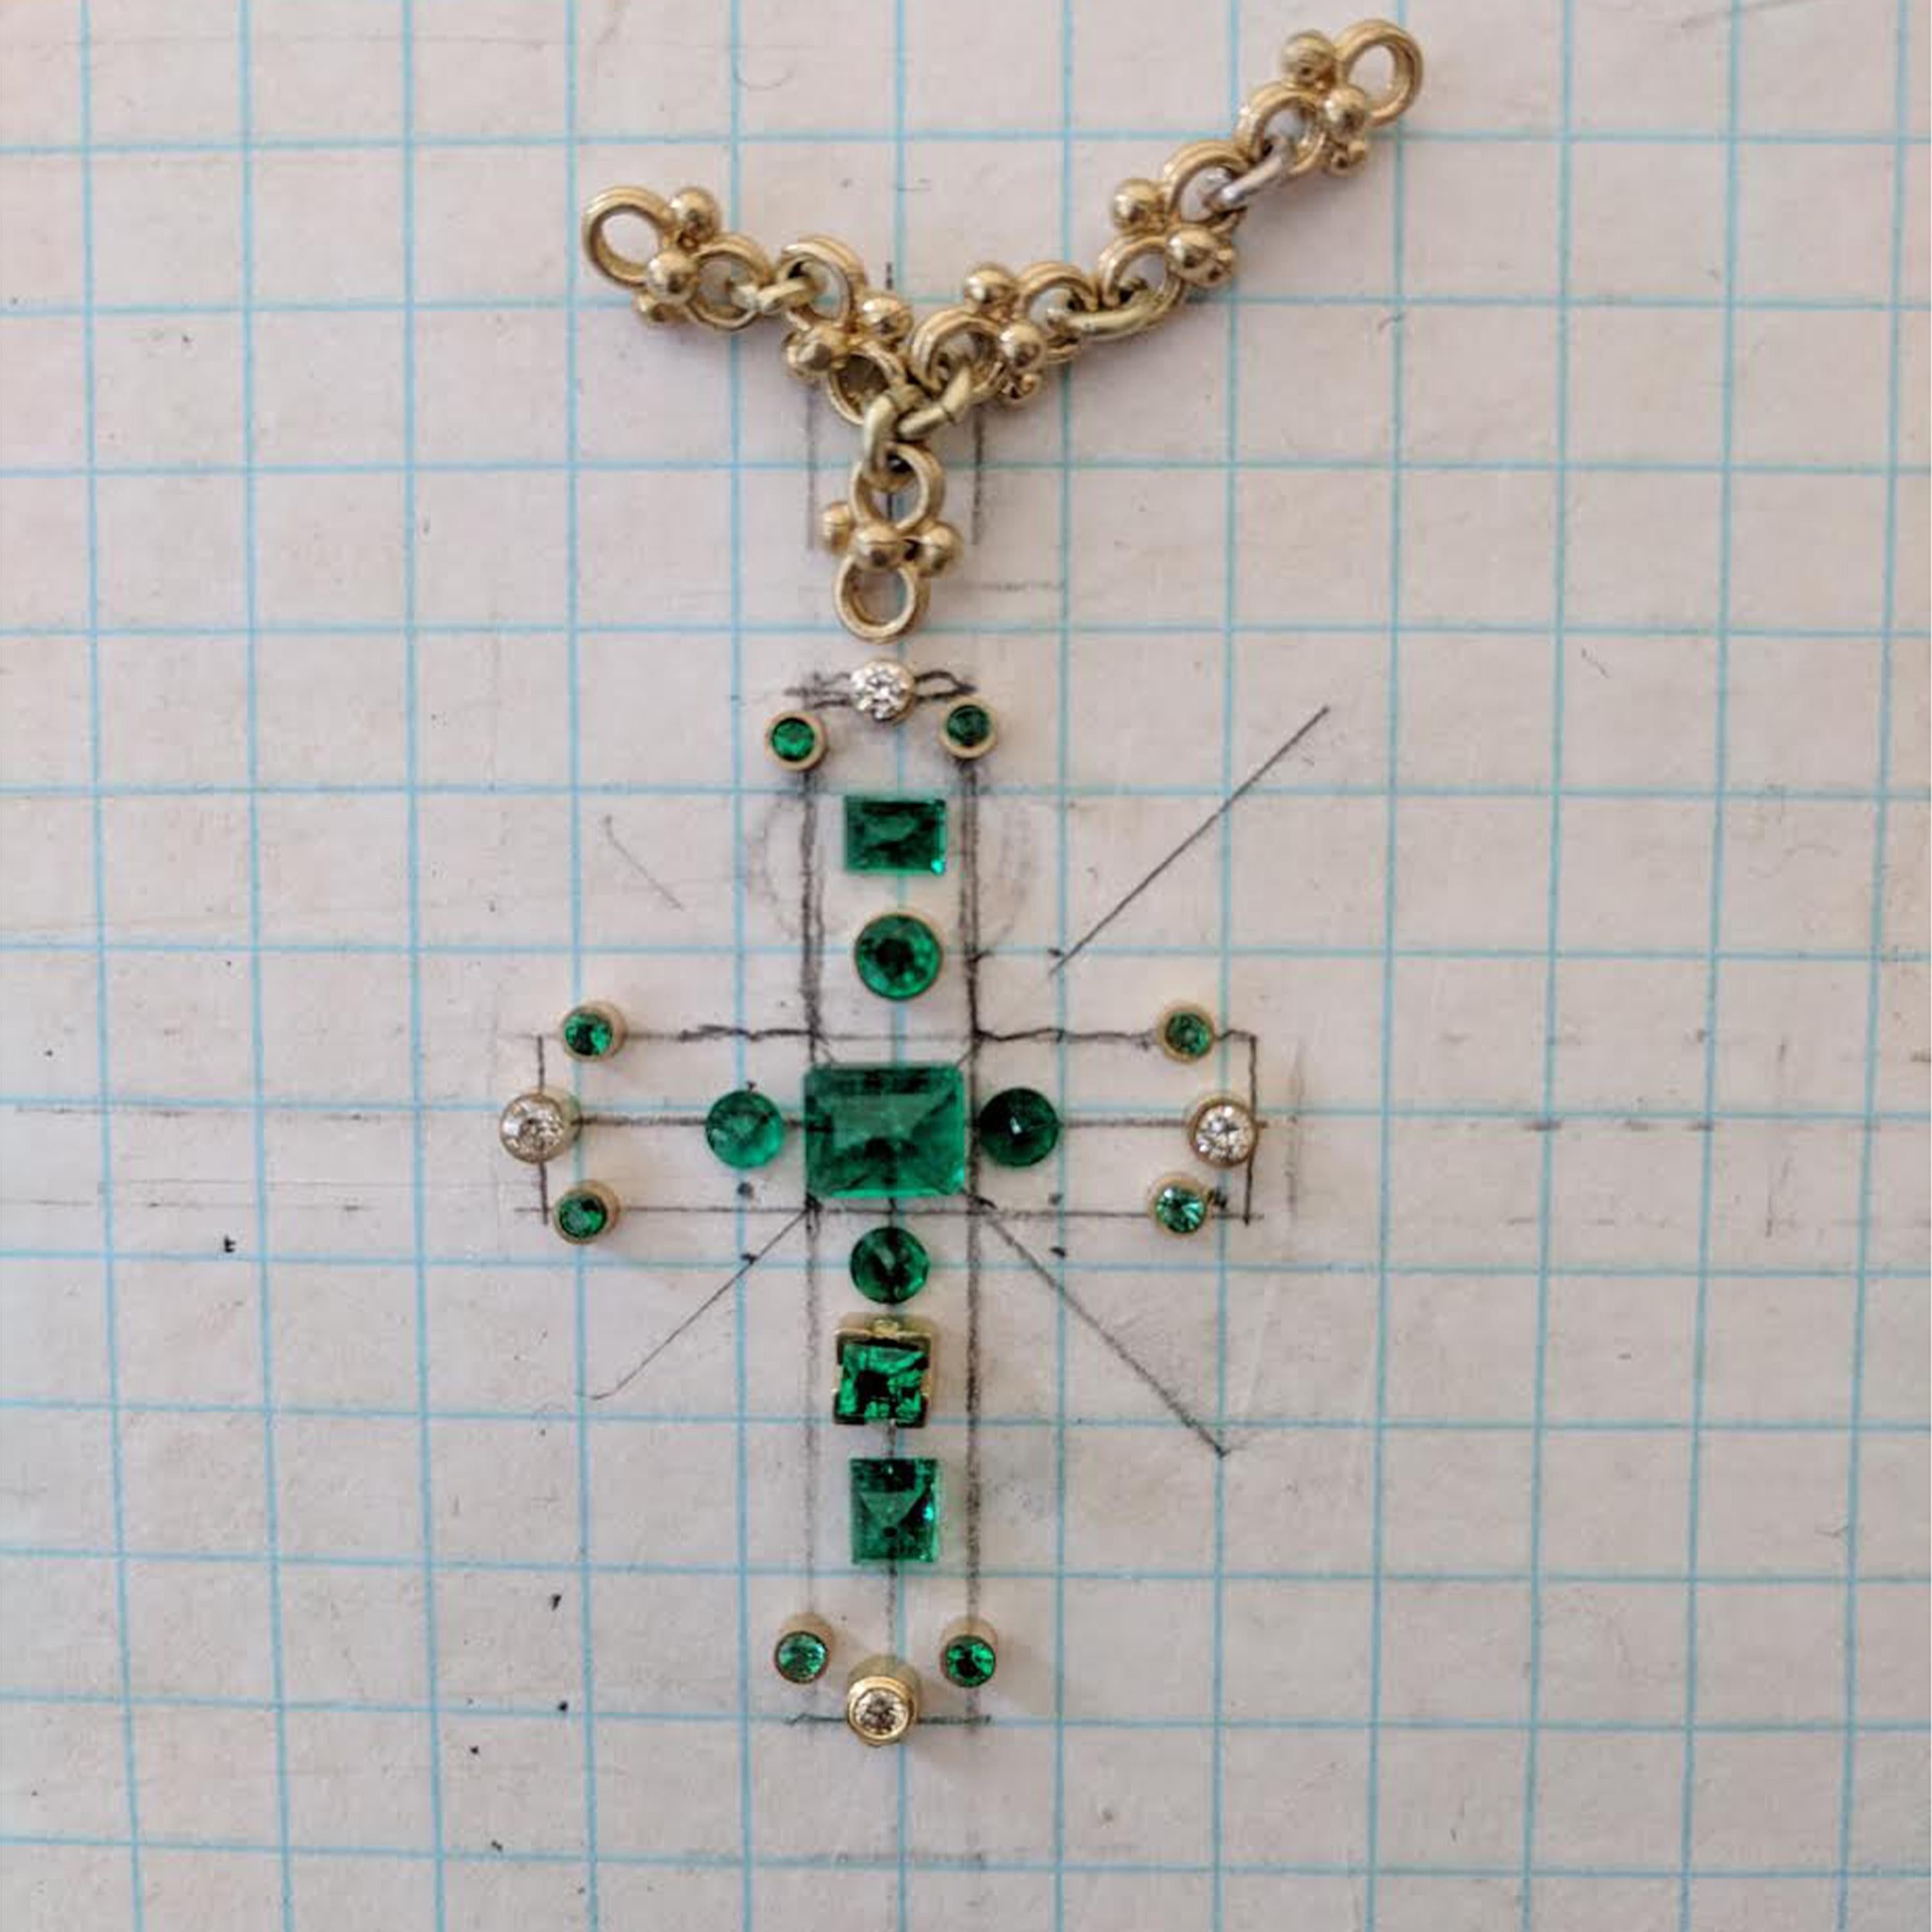 Emerald and Diamond Cross in 18k Gold with Handmade Celtic Chain. Every cross I make is different from the one previously executed. This cross was made with a collection of emeralds that became a finished piece after hours of execution. To balance